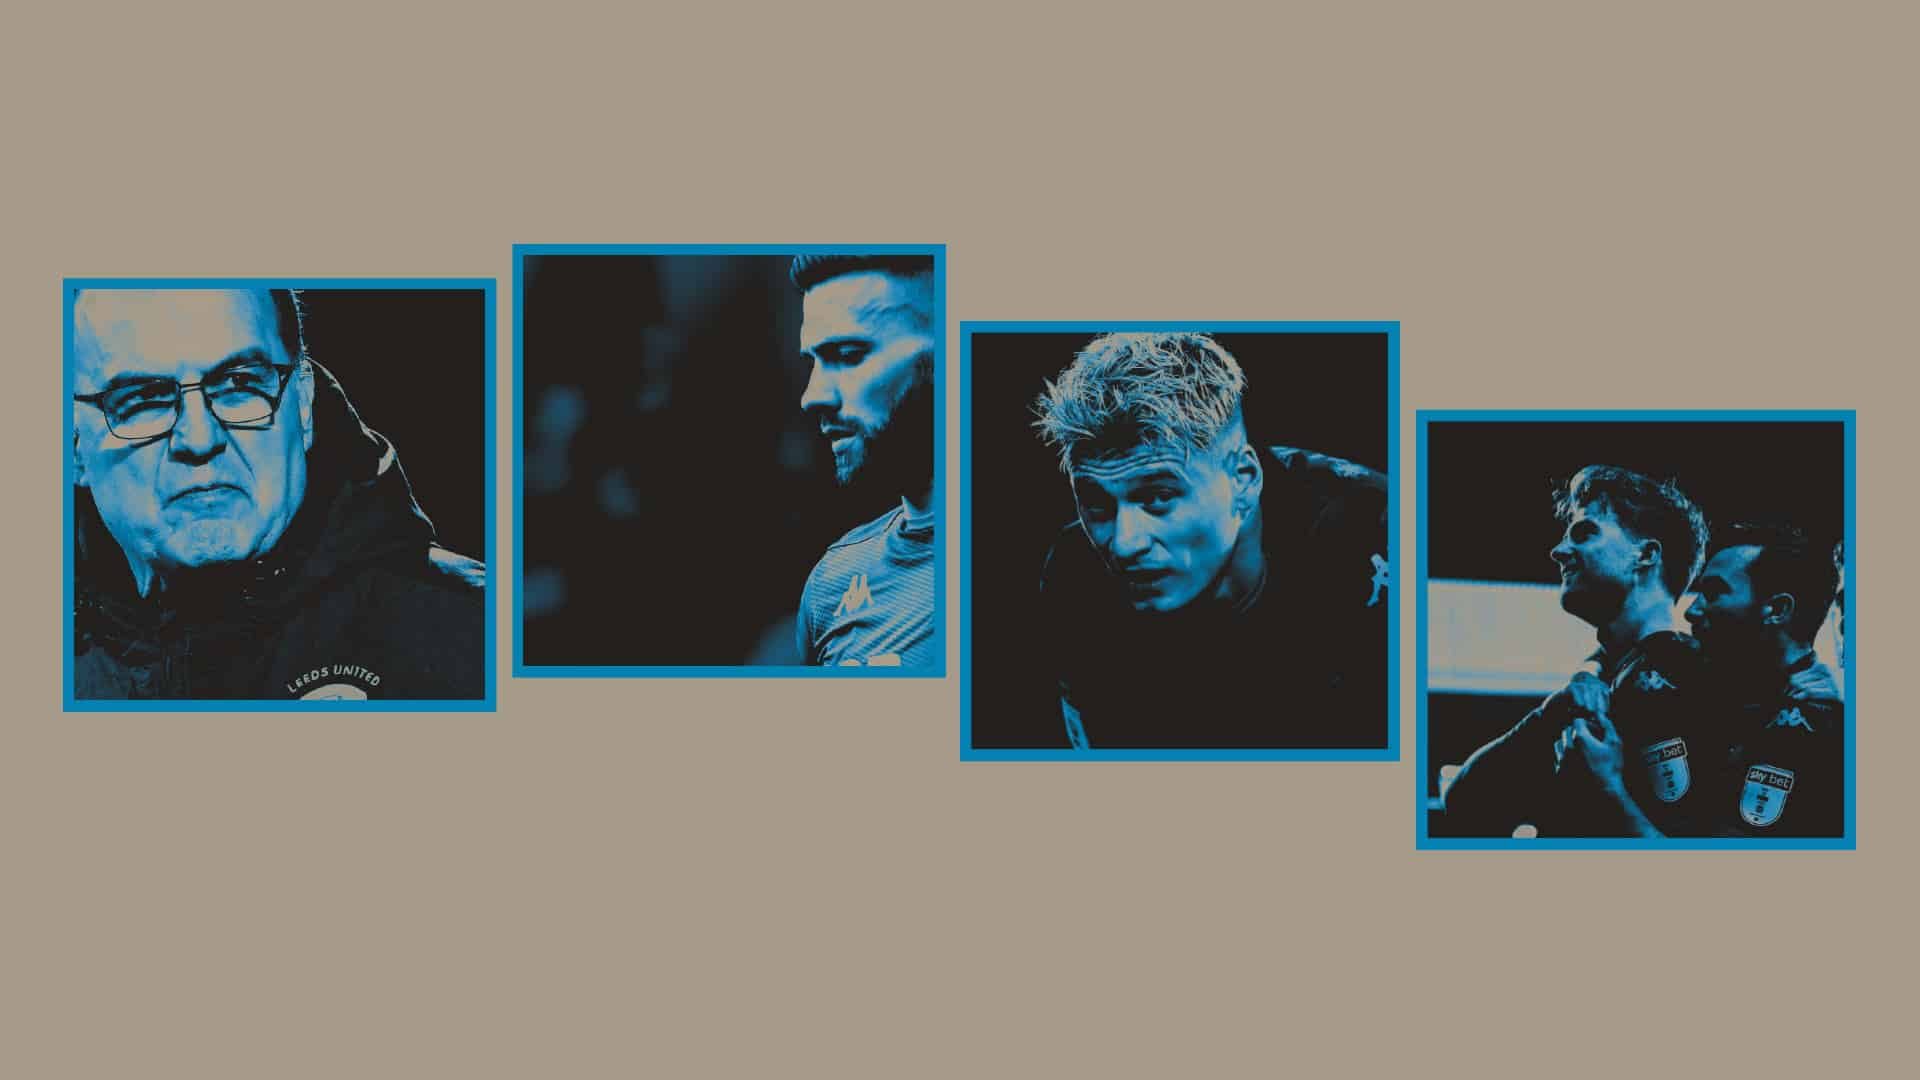 Four images in squares next to each other( left to right): Marcelo Bielsa, Stuart Dallas, Gjanni Alioski, and Pat Bamford